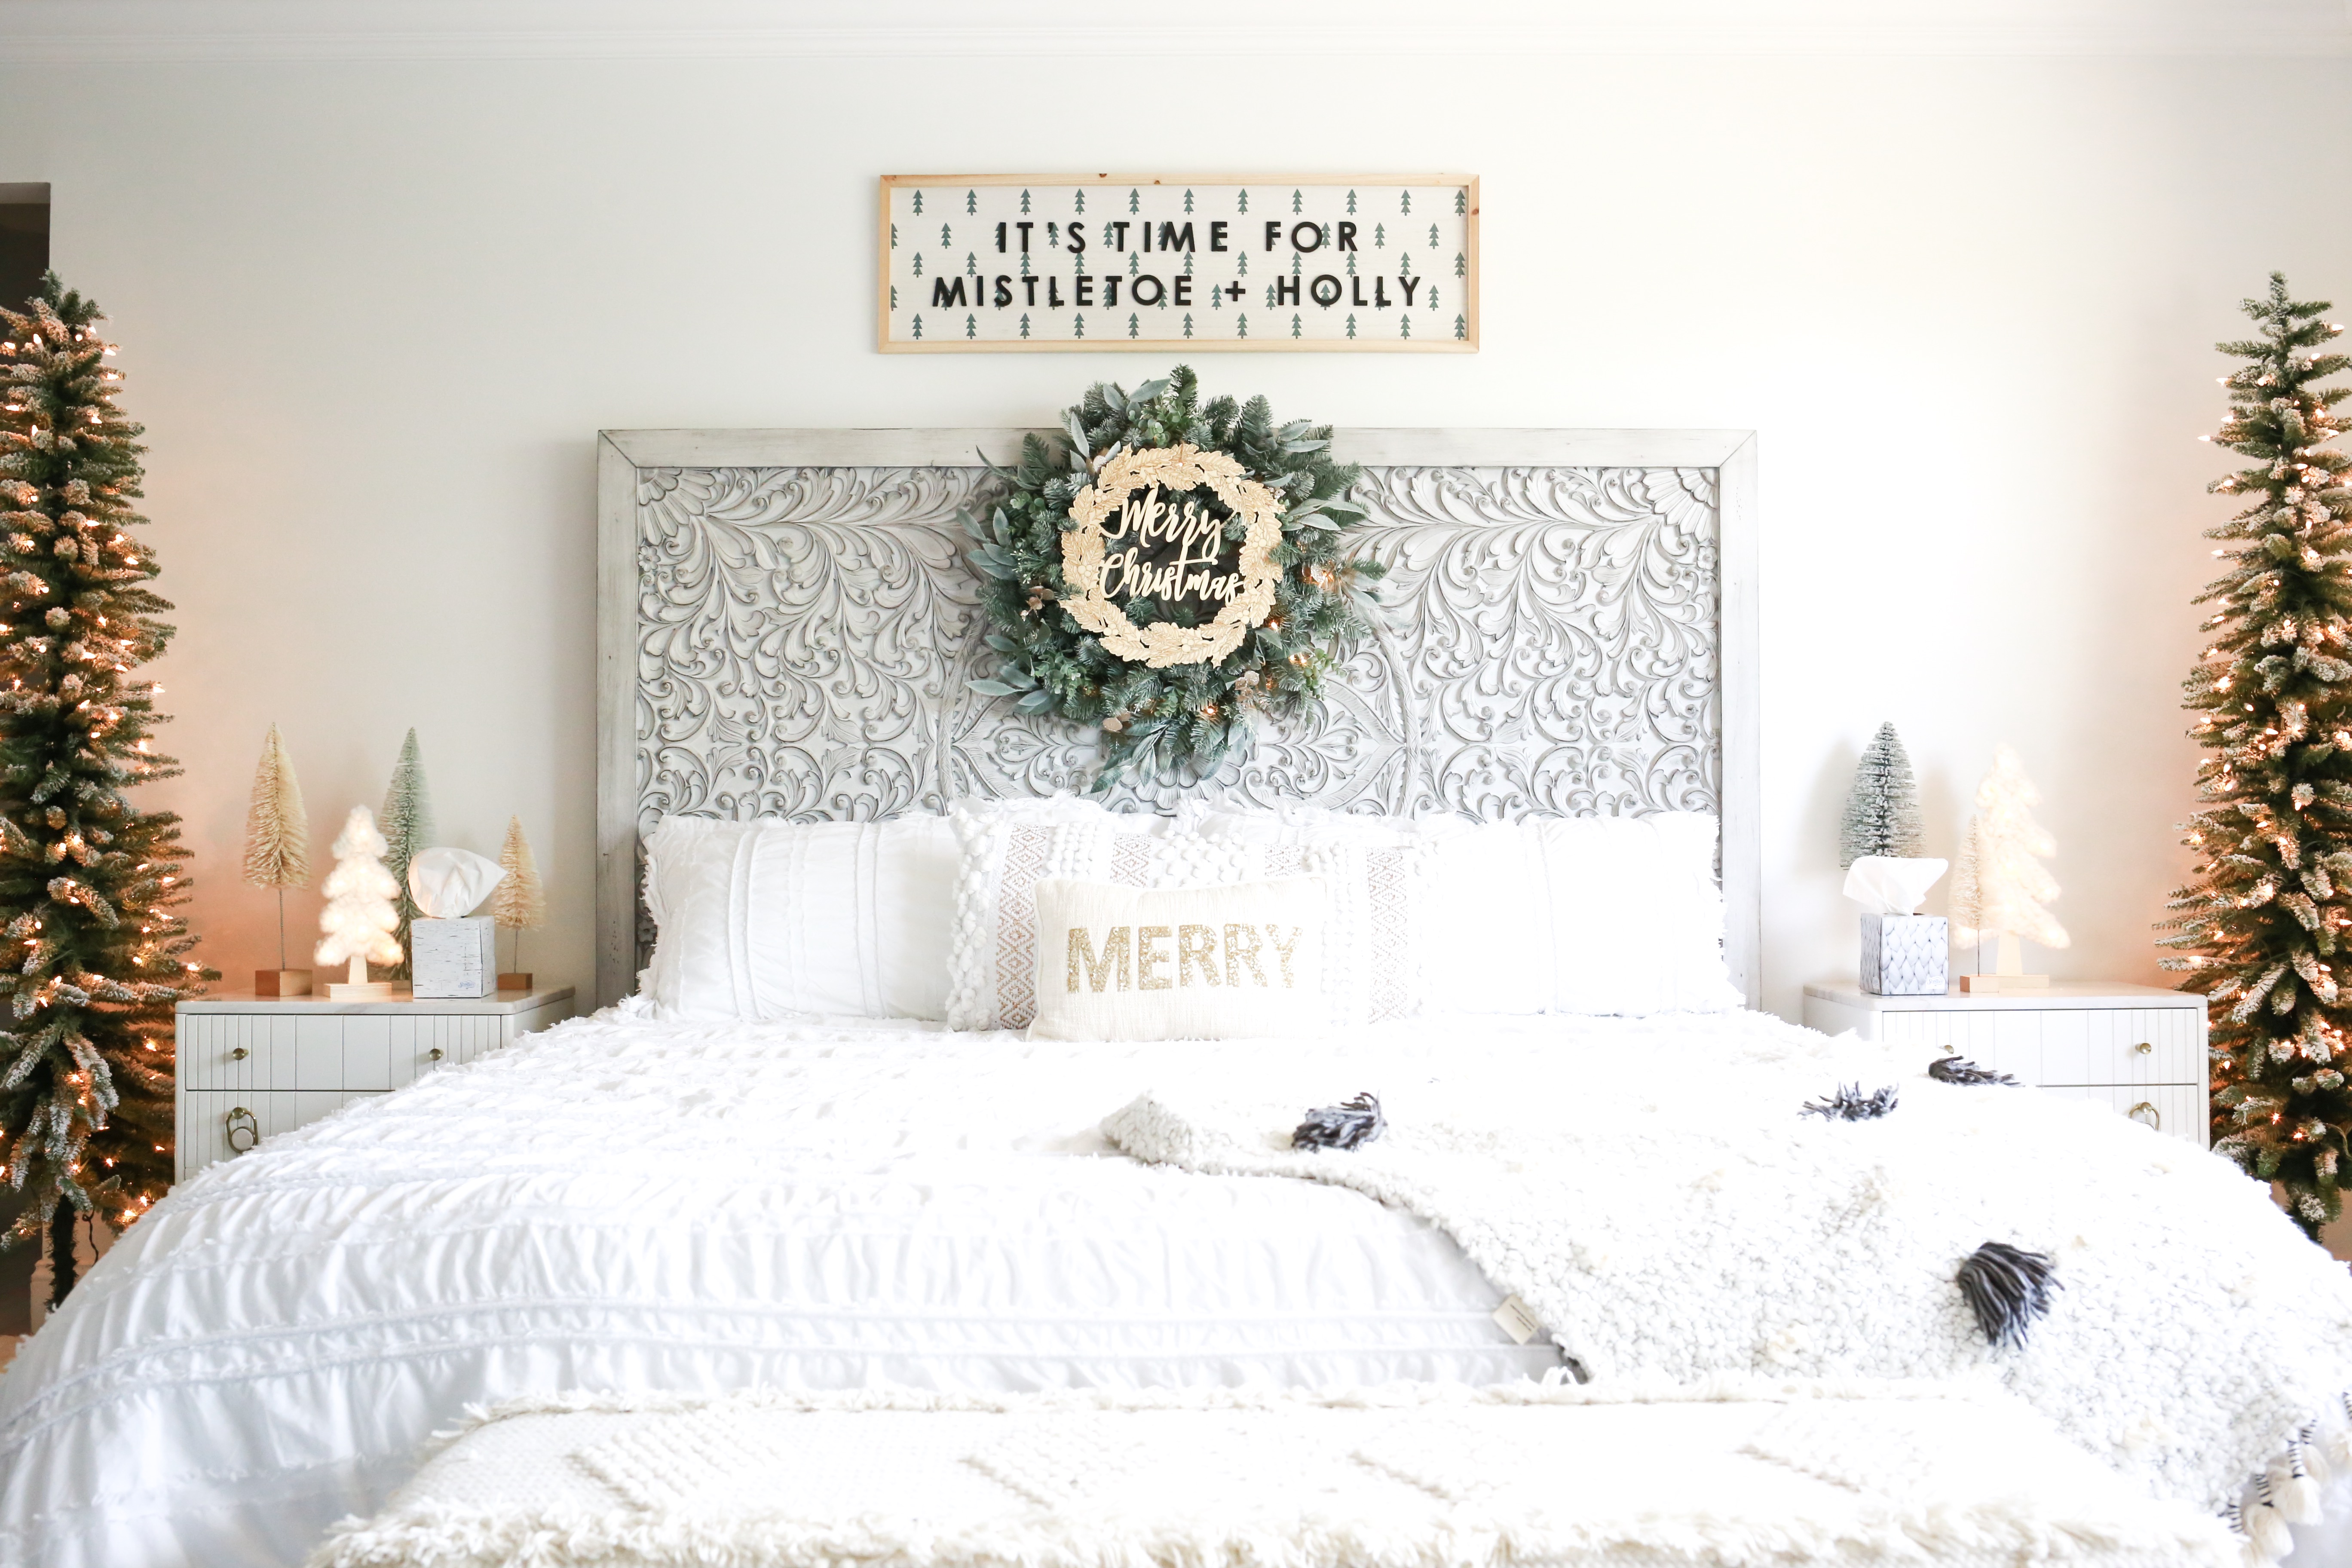 Scotties x Genevieve Gorder collection, bedroom decor for the holidays